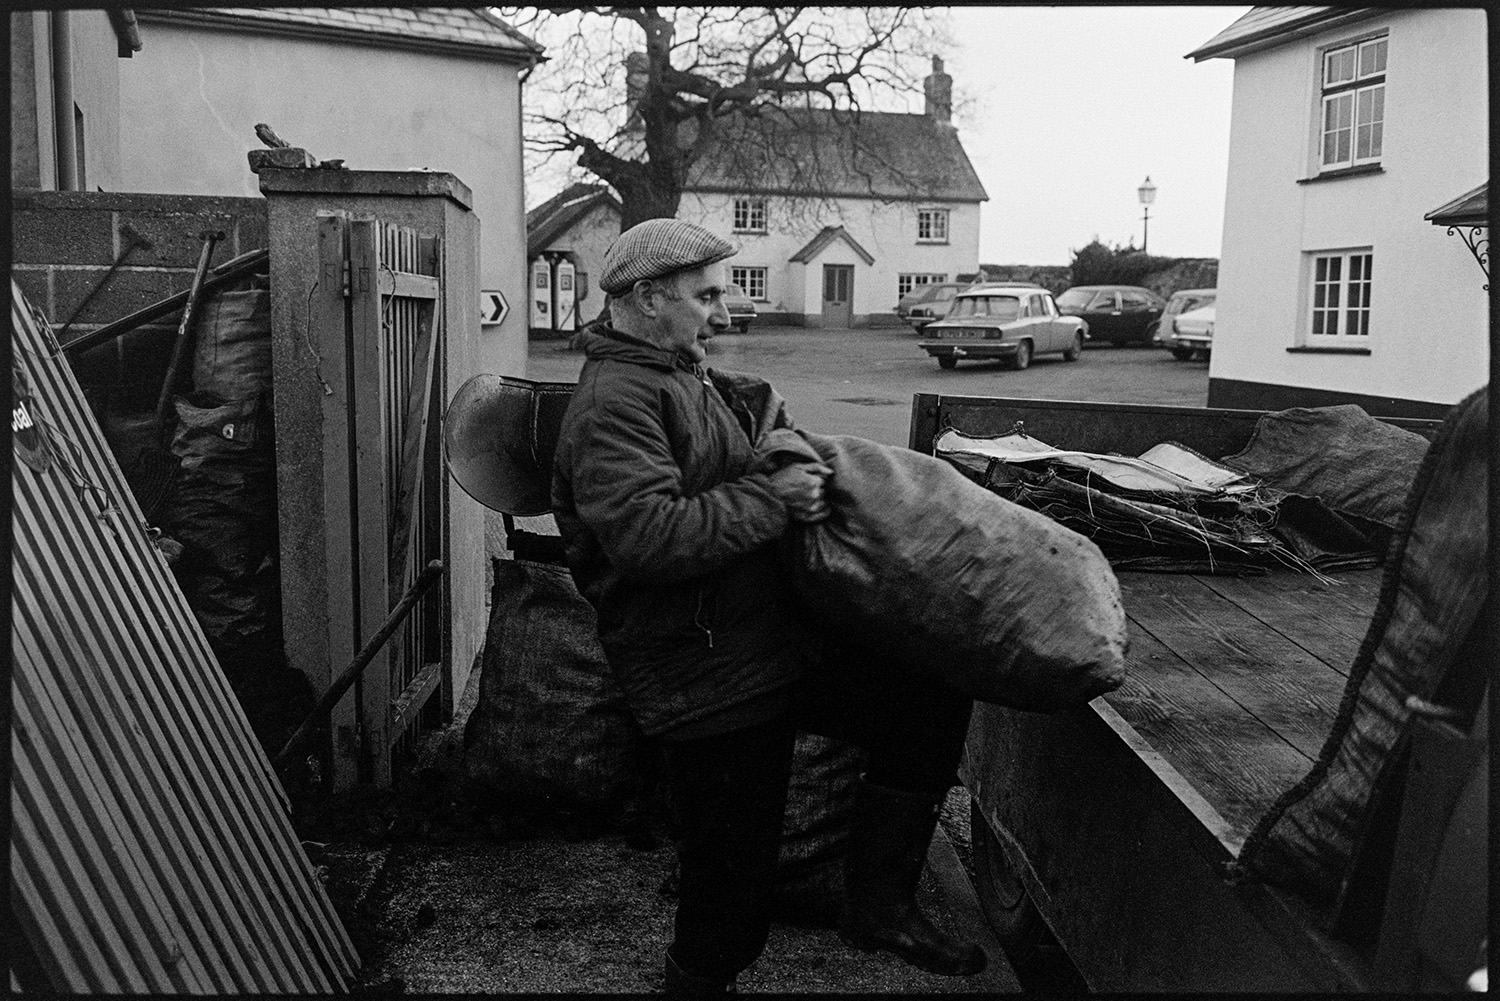 Coal merchant weighing, bagging and loading coal. 
[A man loading sacks of coal onto a truck in Burrington, Houses, parked cars, petrol pumps and the Burrington oak can be seen in the background.]